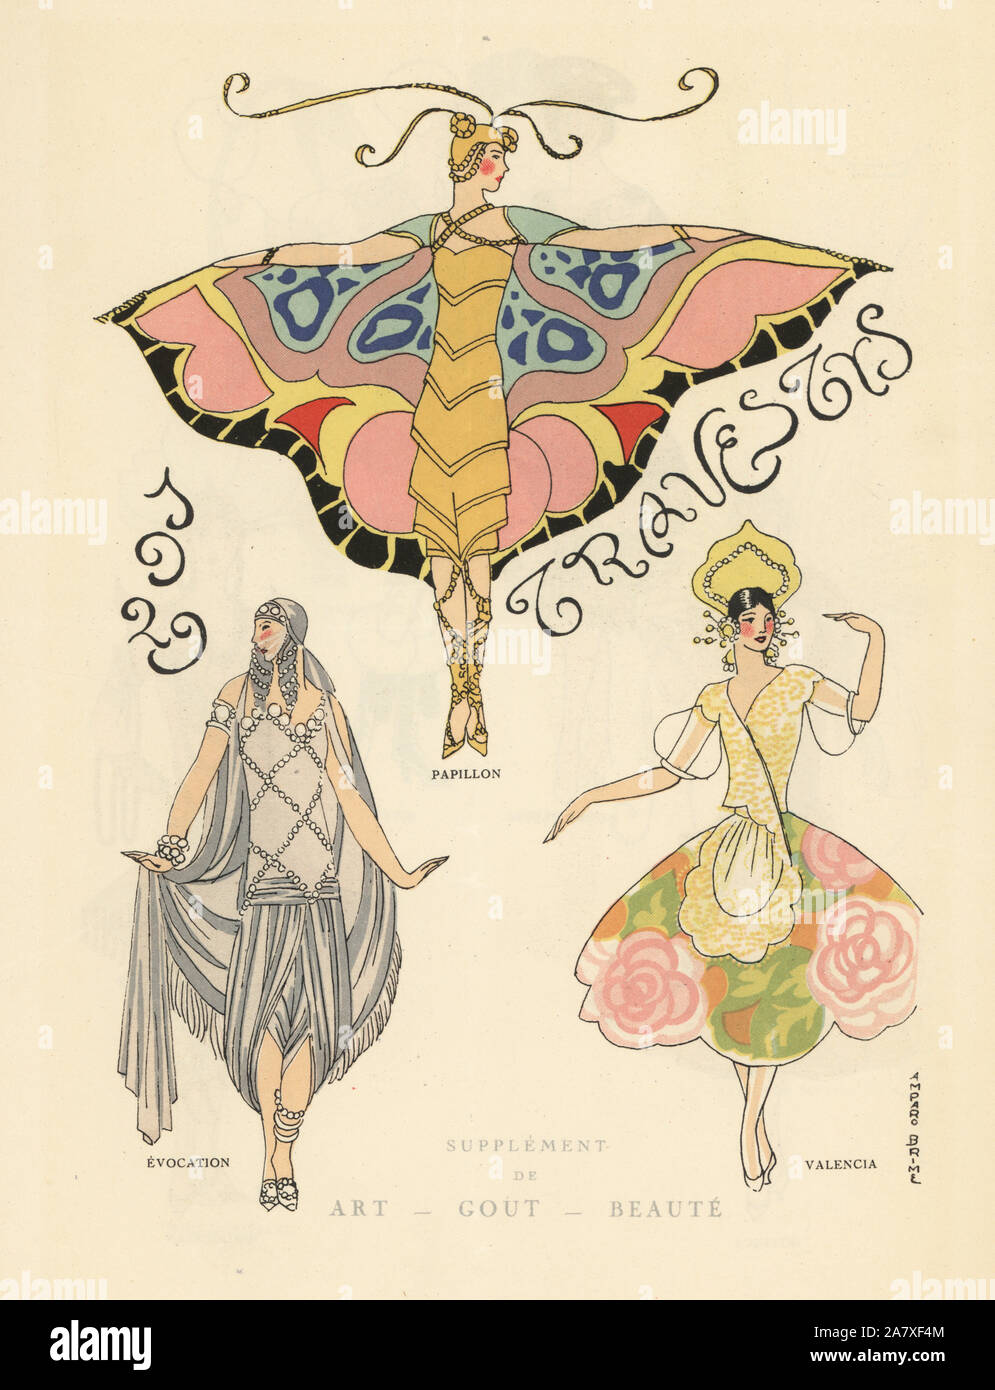 Women in fancy dress costumes as a butterfly, emblem of evocation and Spanish dancer Valencia. Illustrations by Amparo Brime. Handcolored pochoir (stencil) lithograph from the French luxury fashion magazine Art, Gout, Beaute, 1929. Stock Photo